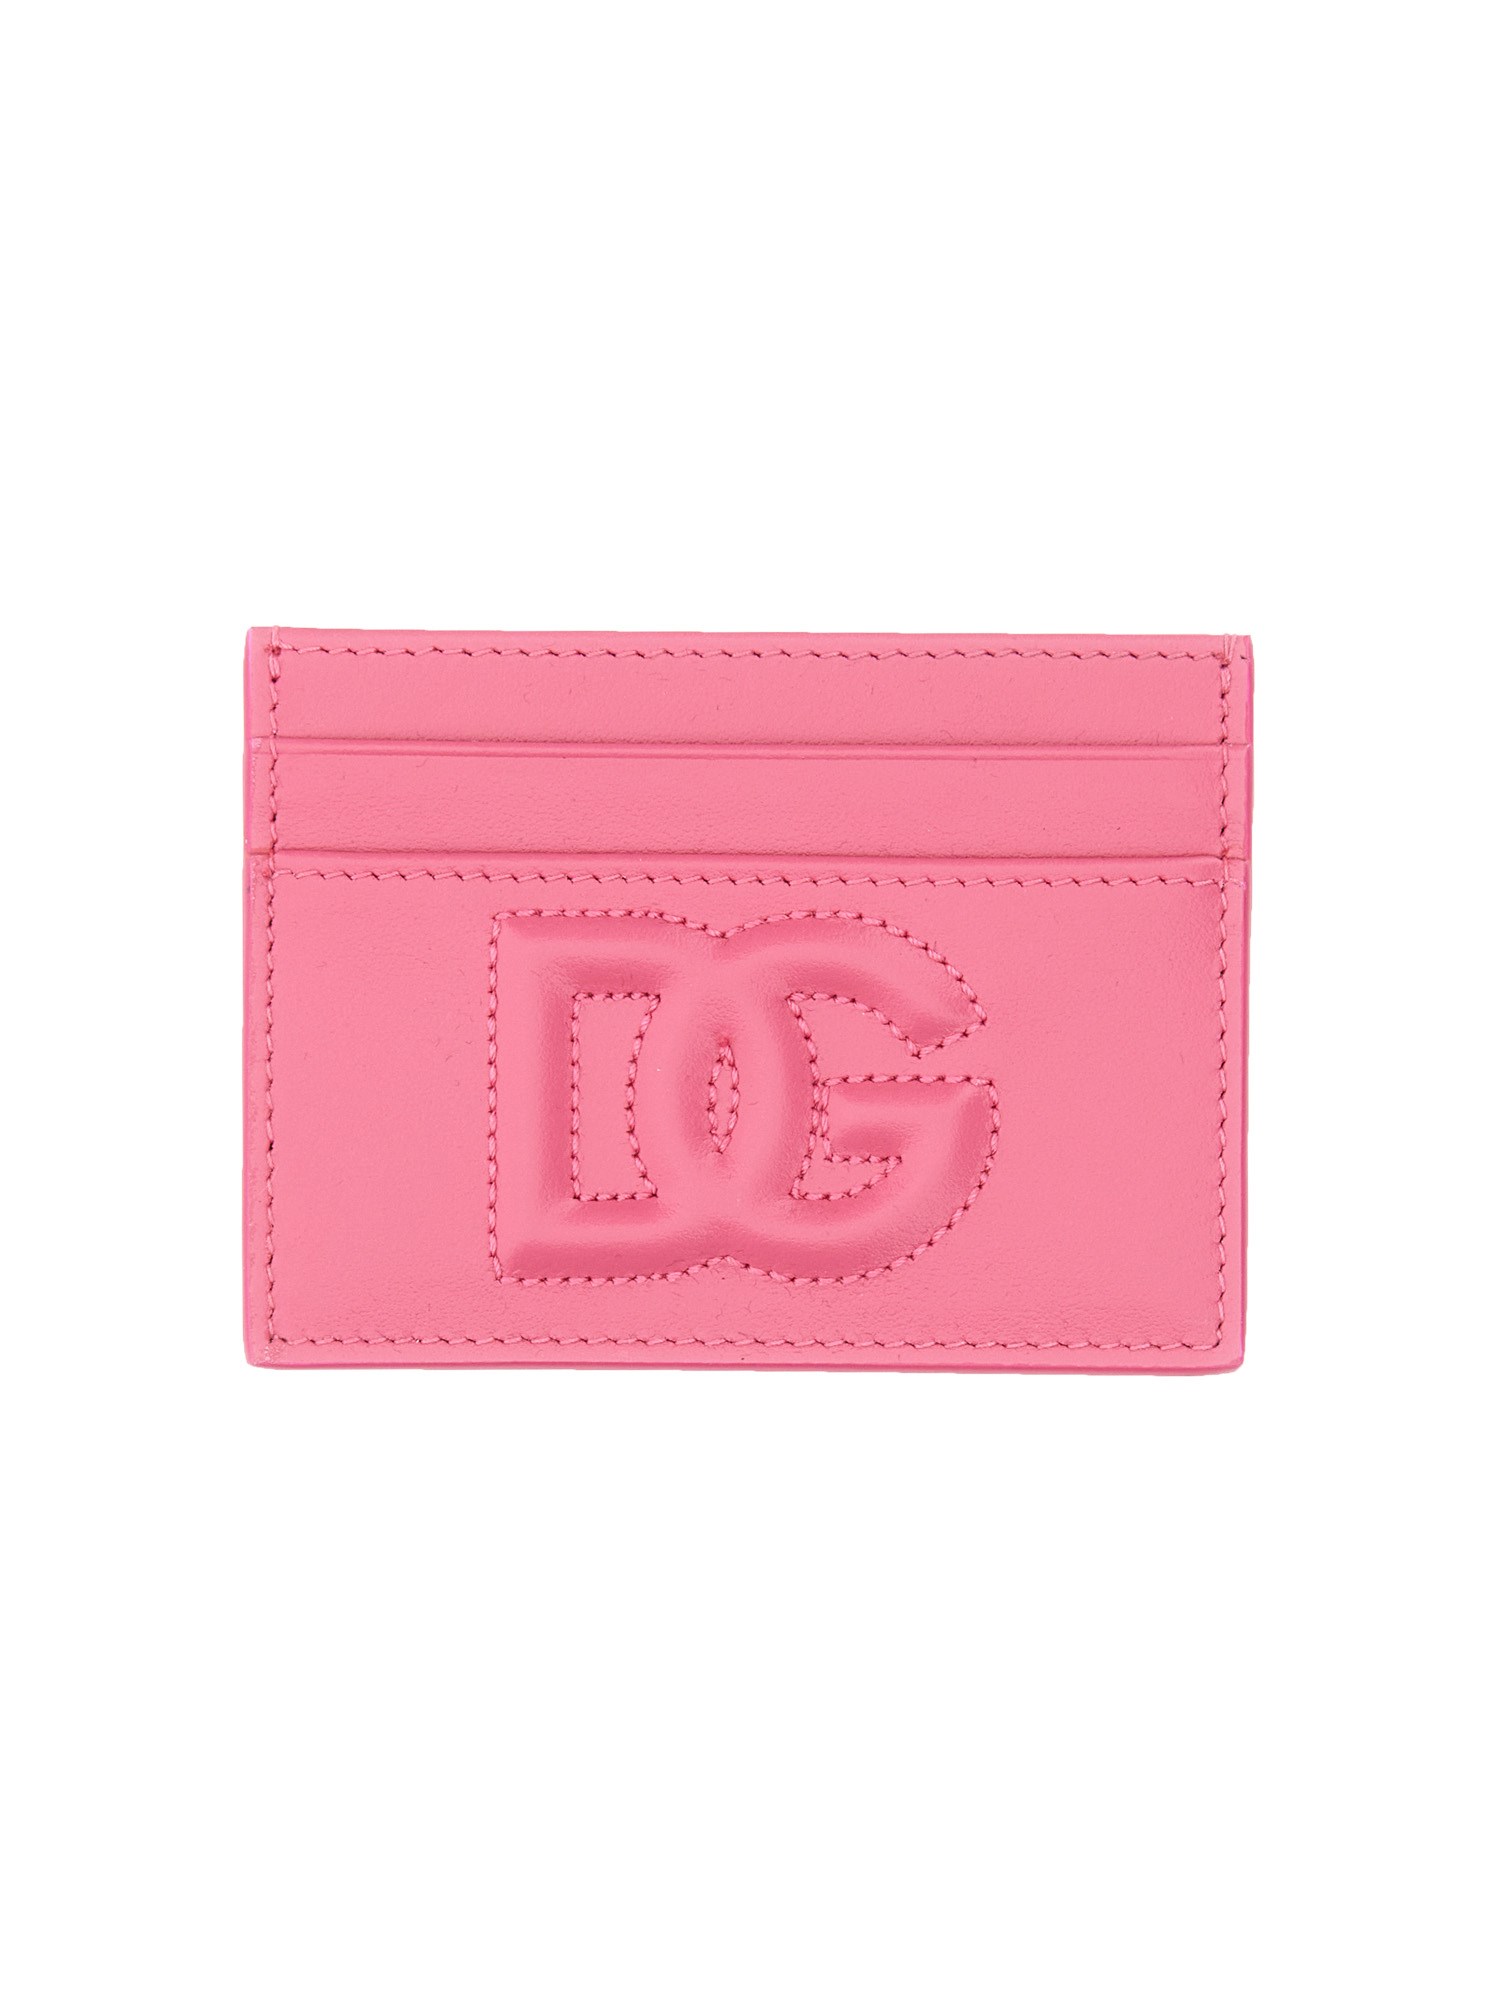 Dolce & Gabbana Leather Card Holder In Pink